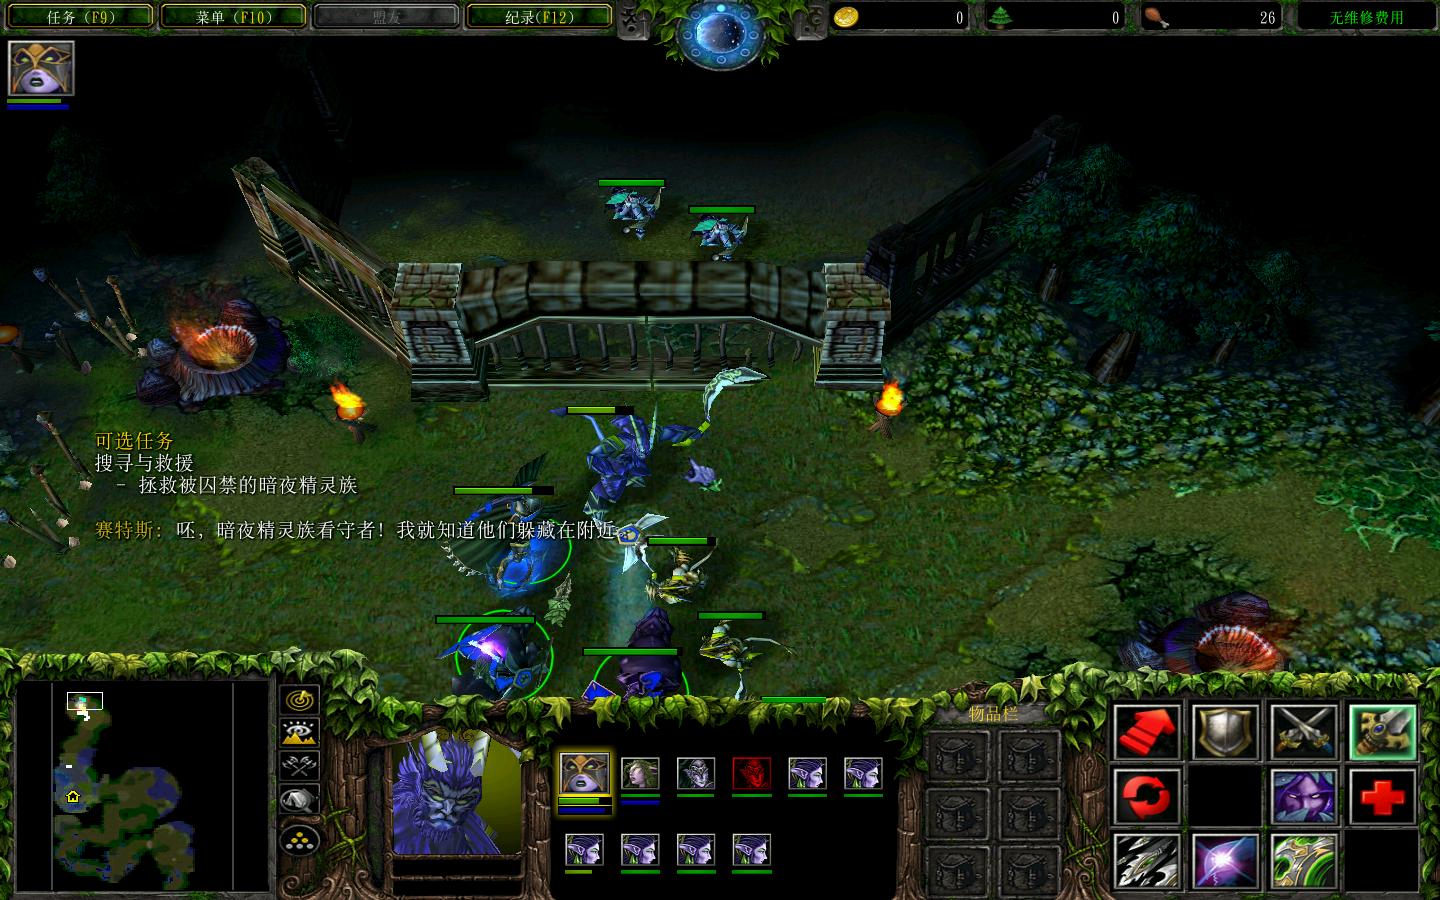 ħ3Warcraft III The Frozen Thronev1.24衤ʽv2.0ְ